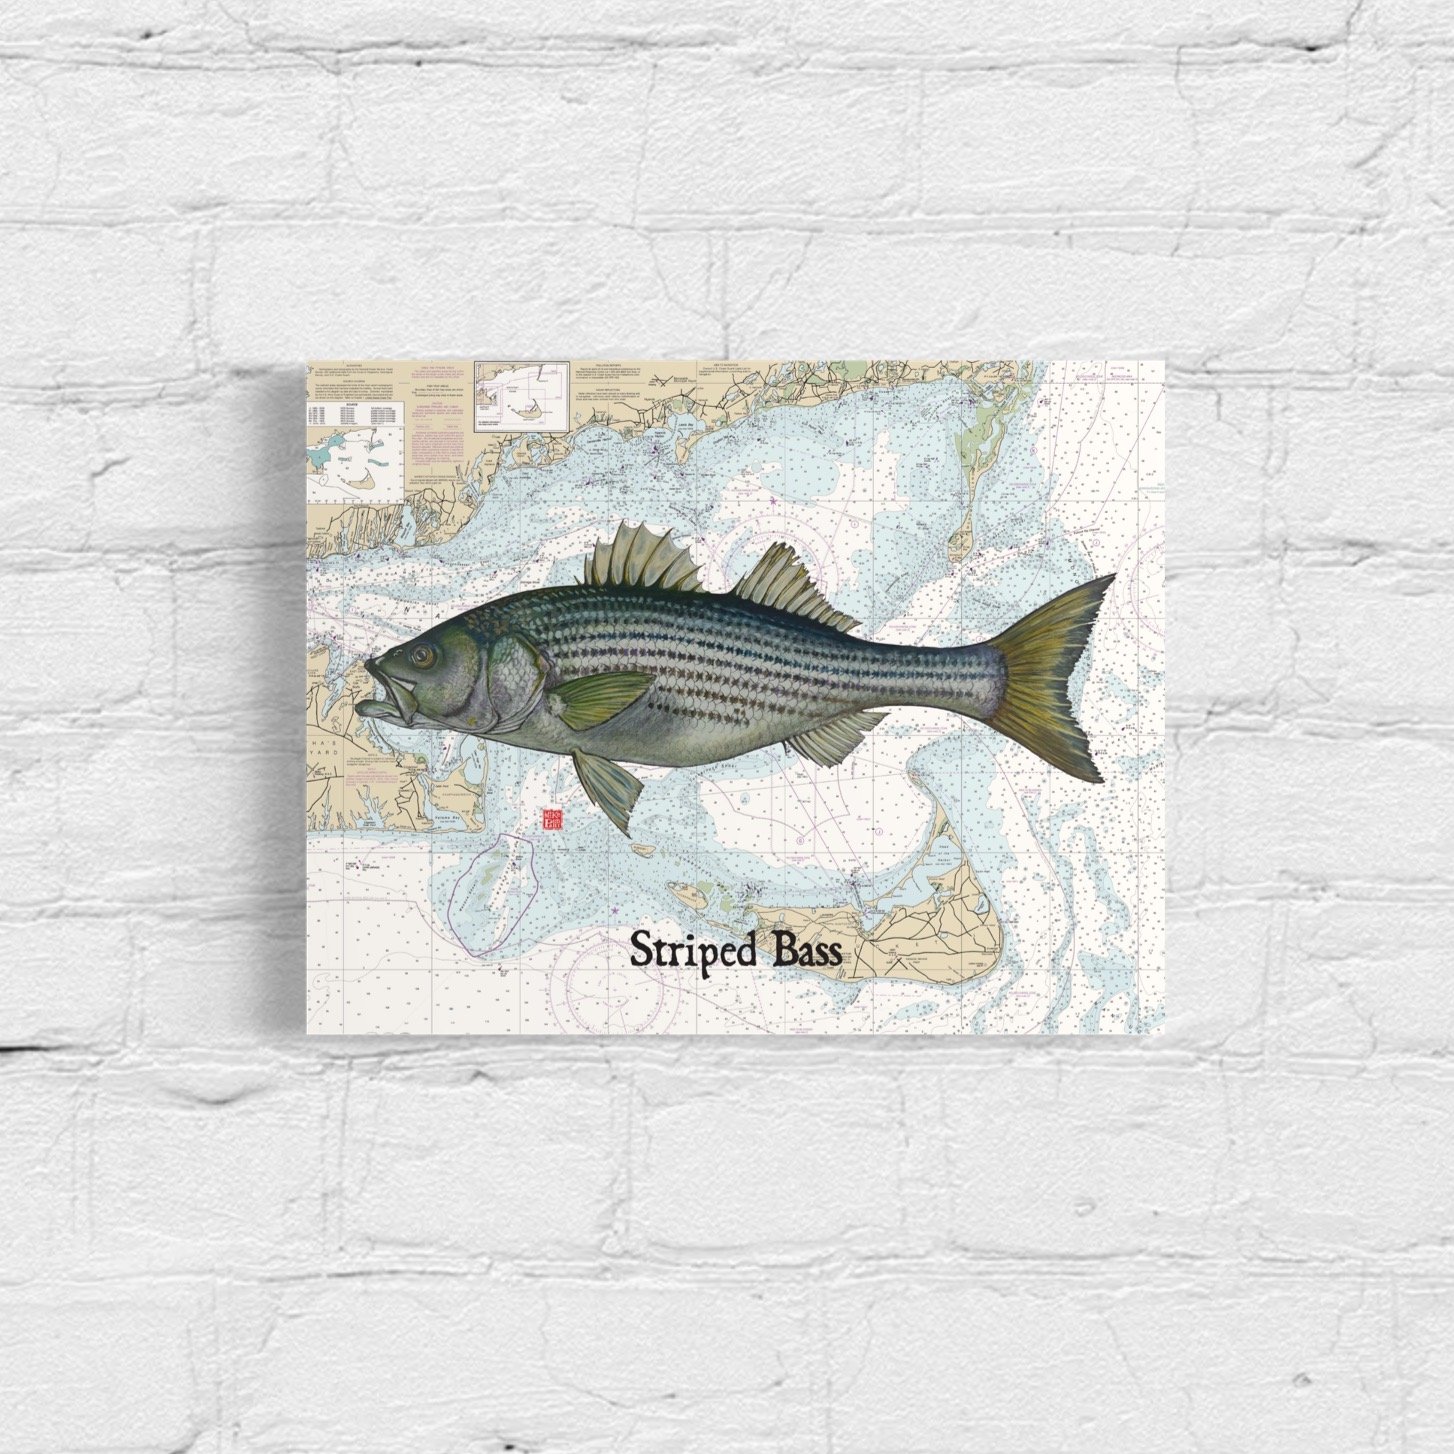 Striped Bass - Cape Cod Canal Poster — Waquoit Bay Fish Company